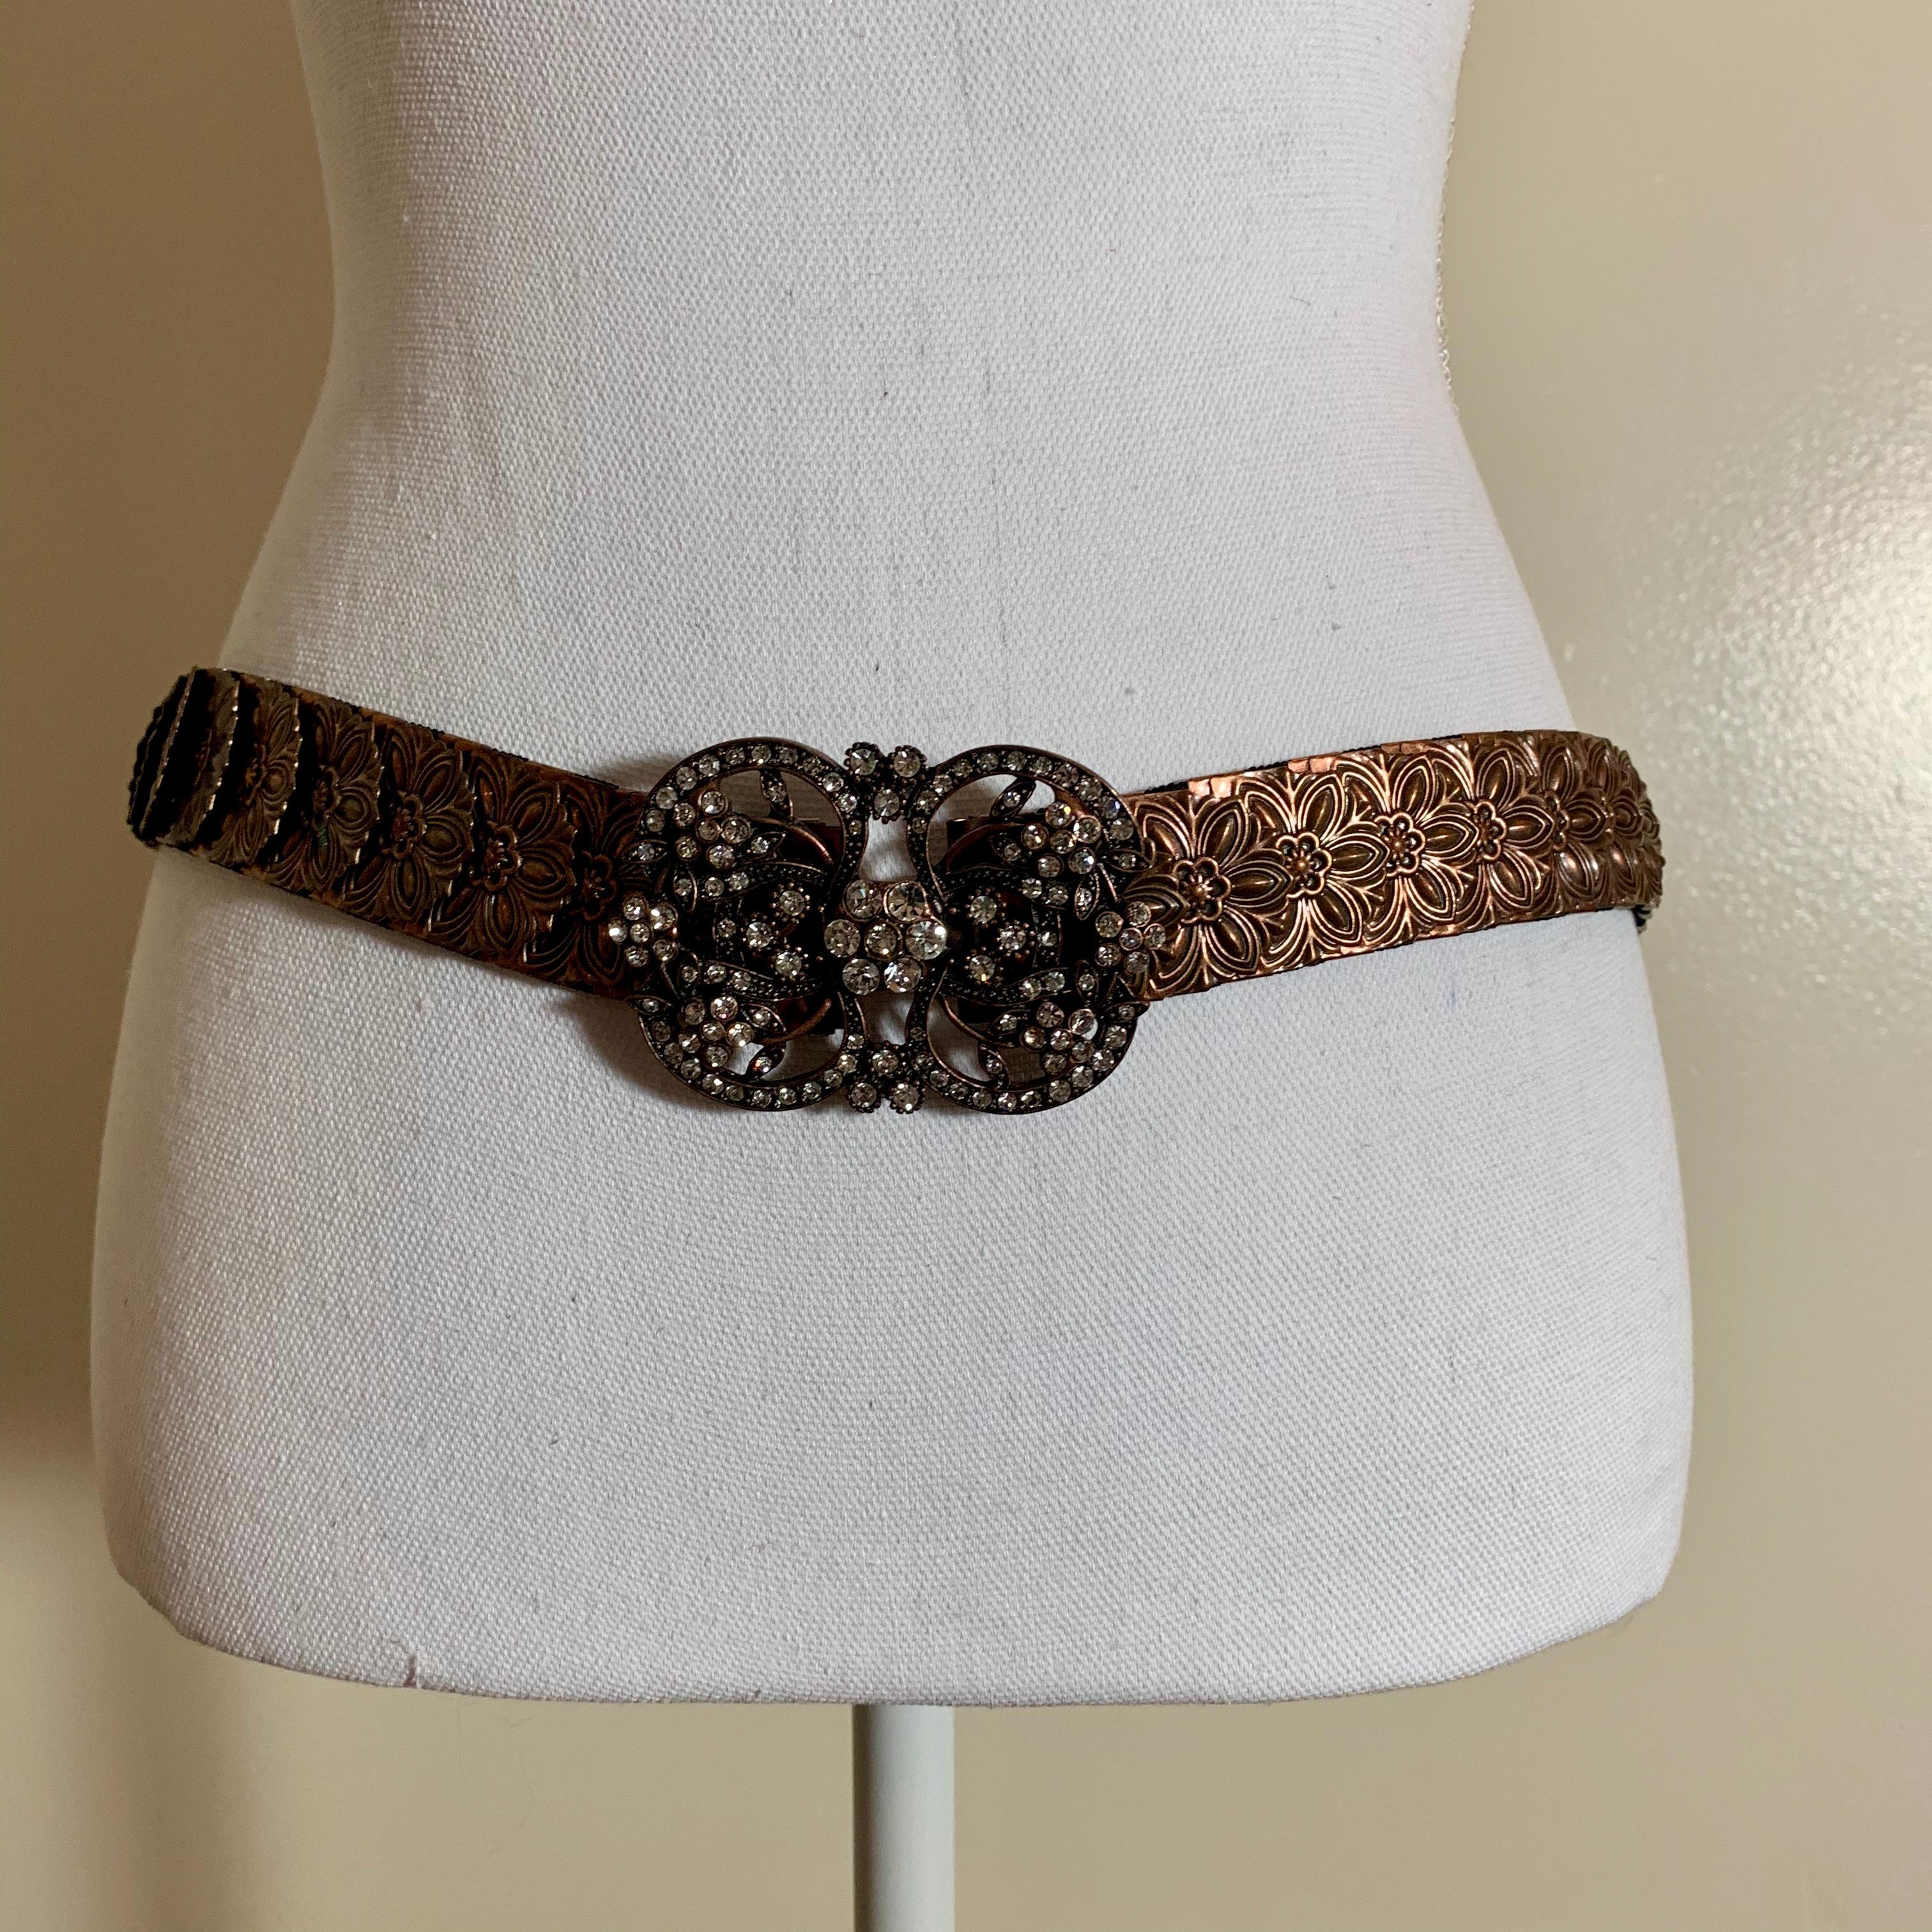 International Style 1970s Era Copper-Tone Snake Scale Metal and Crystal Jeweled Buckle Handmade Belt For Sale